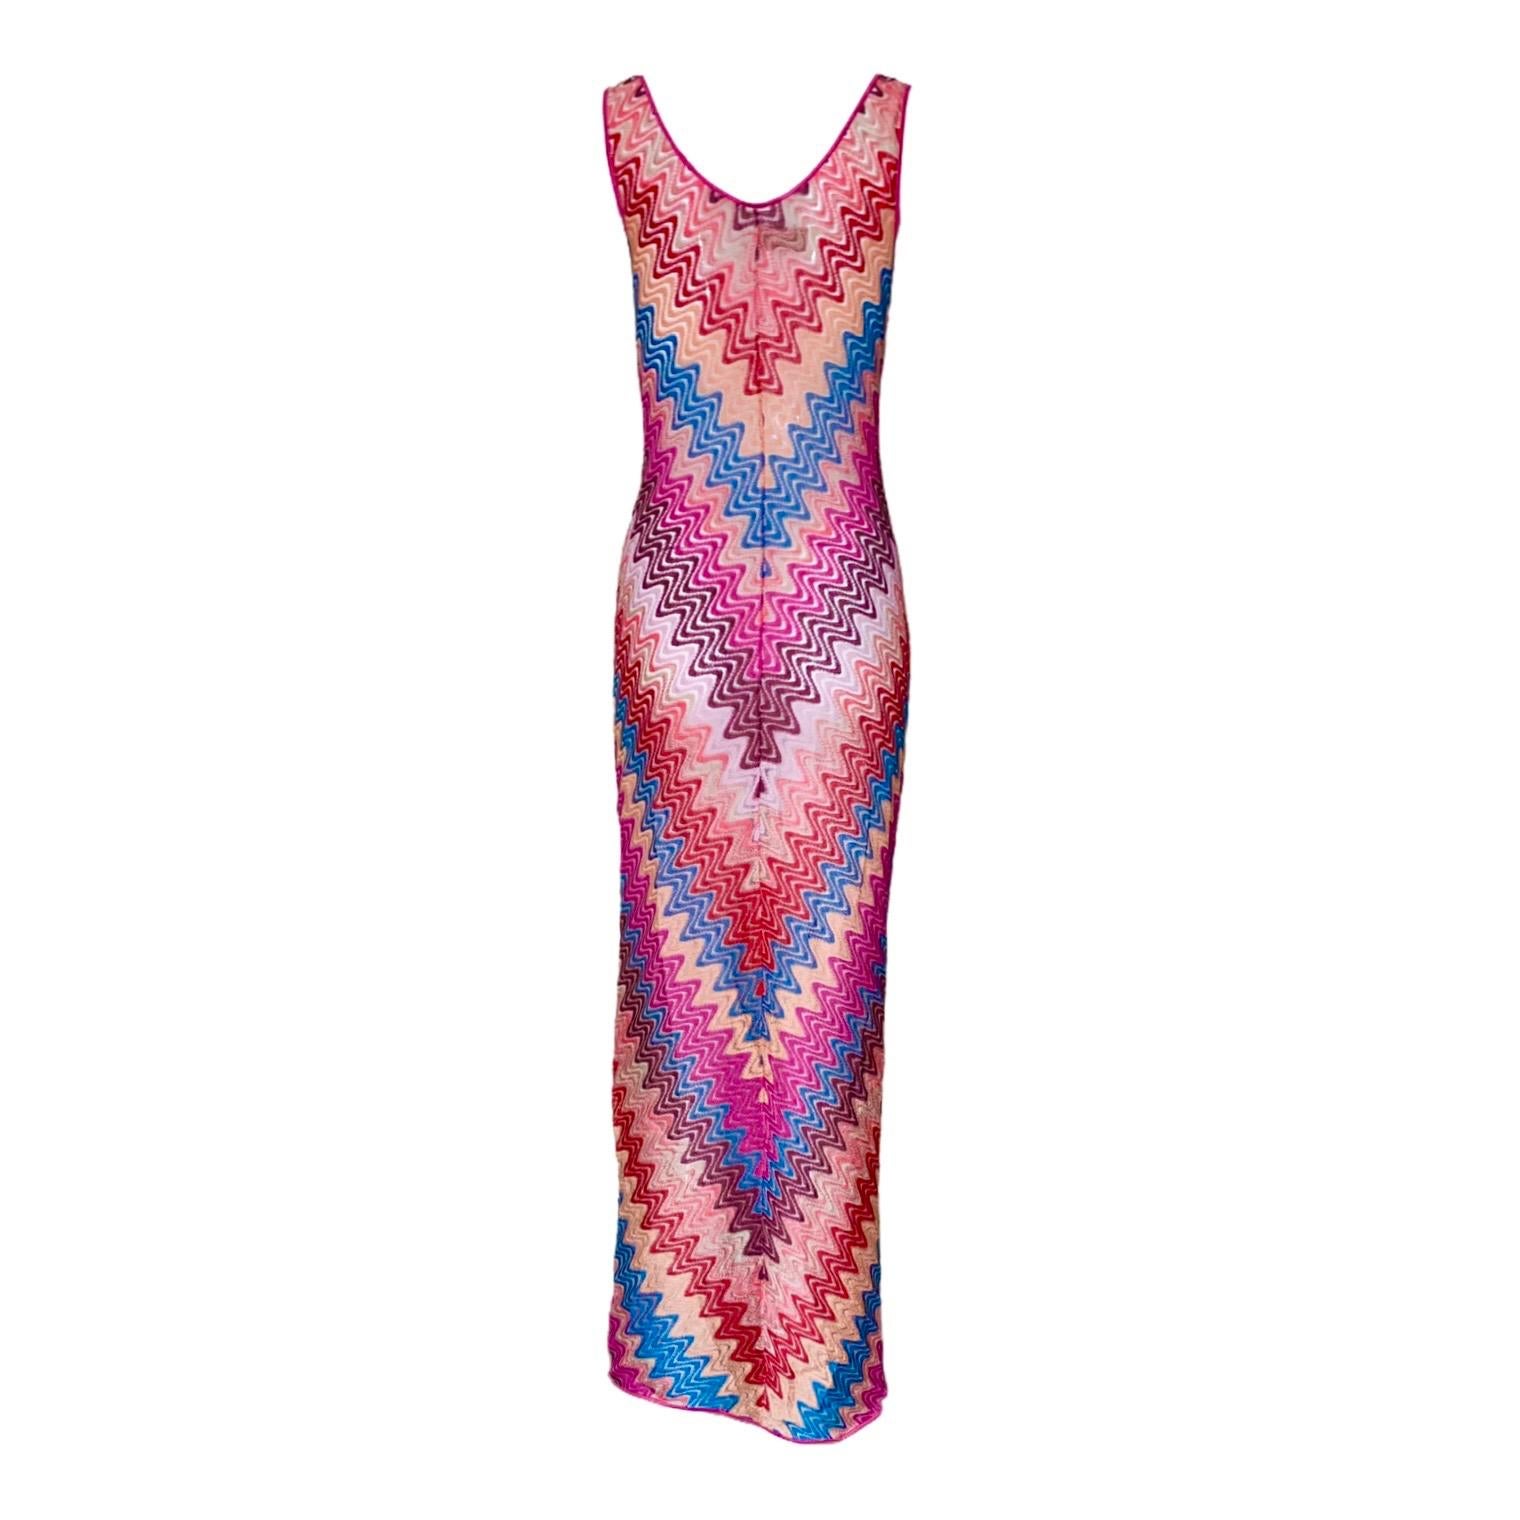 Missoni multicoloured maxi dress in the label’s historic zigzag knit. Look to Missoni for vibrant and feminine pieces such as this amazing maxi dress. Made in Italy, it's shaped with a slim-fitting shape that features a flattering V-neckline and